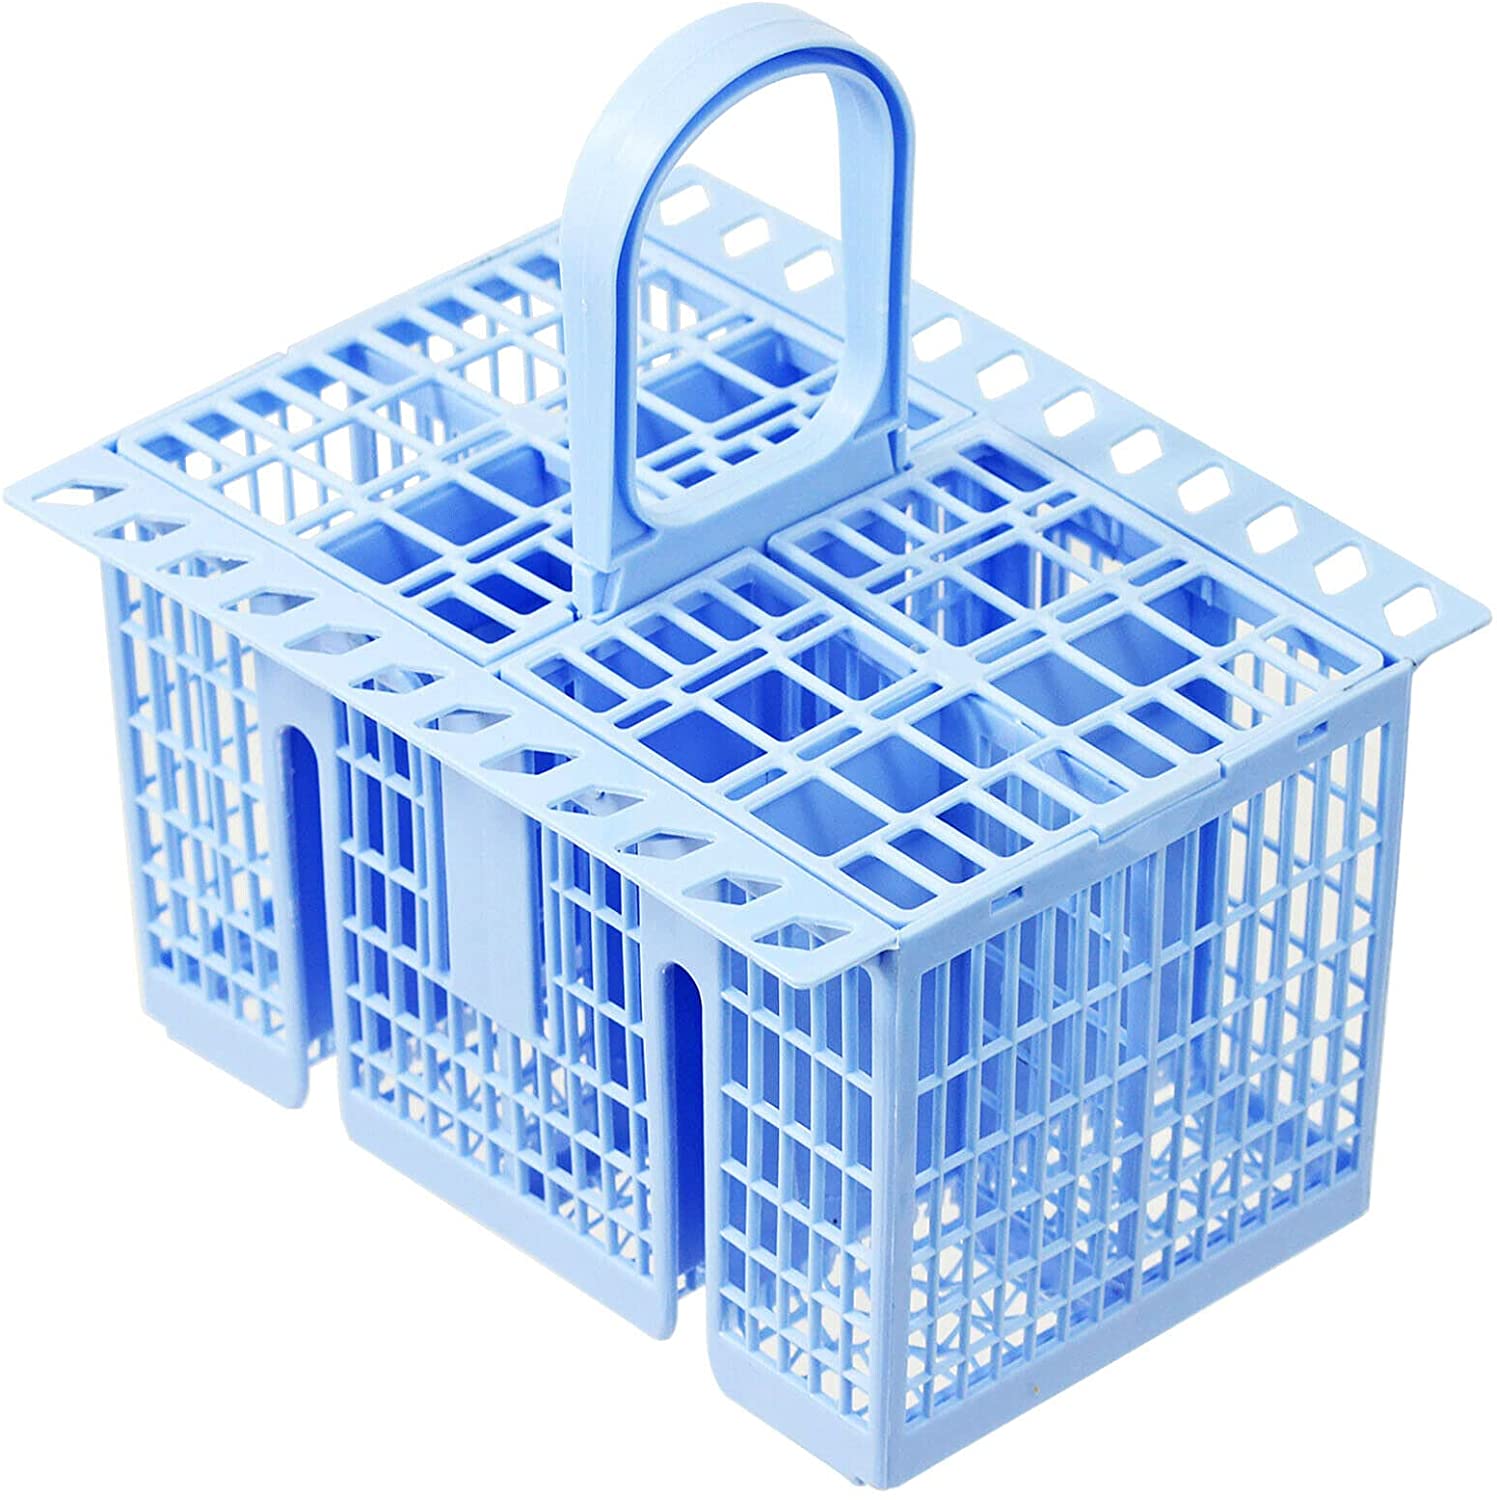 SPARES2GO Cutlery Basket compatible with Whirlpool Dishwasher (Blue, 220 x 208 x 160mm)